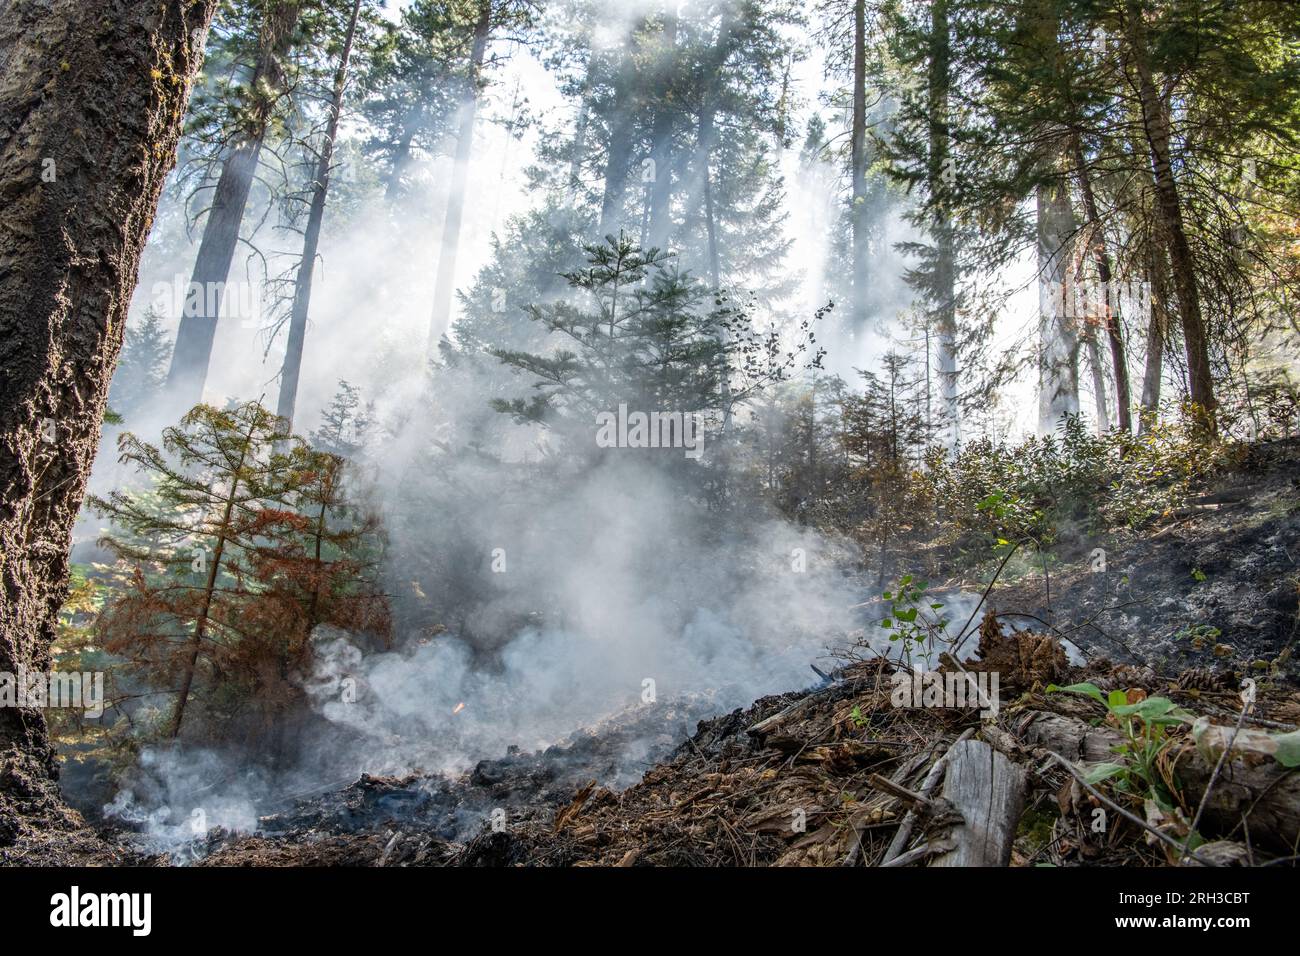 Smoke and haze fill the air in Stanislaus National Forest in the Sierra Nevada of California as a low intensity fire burns through the underbrush. Stock Photo